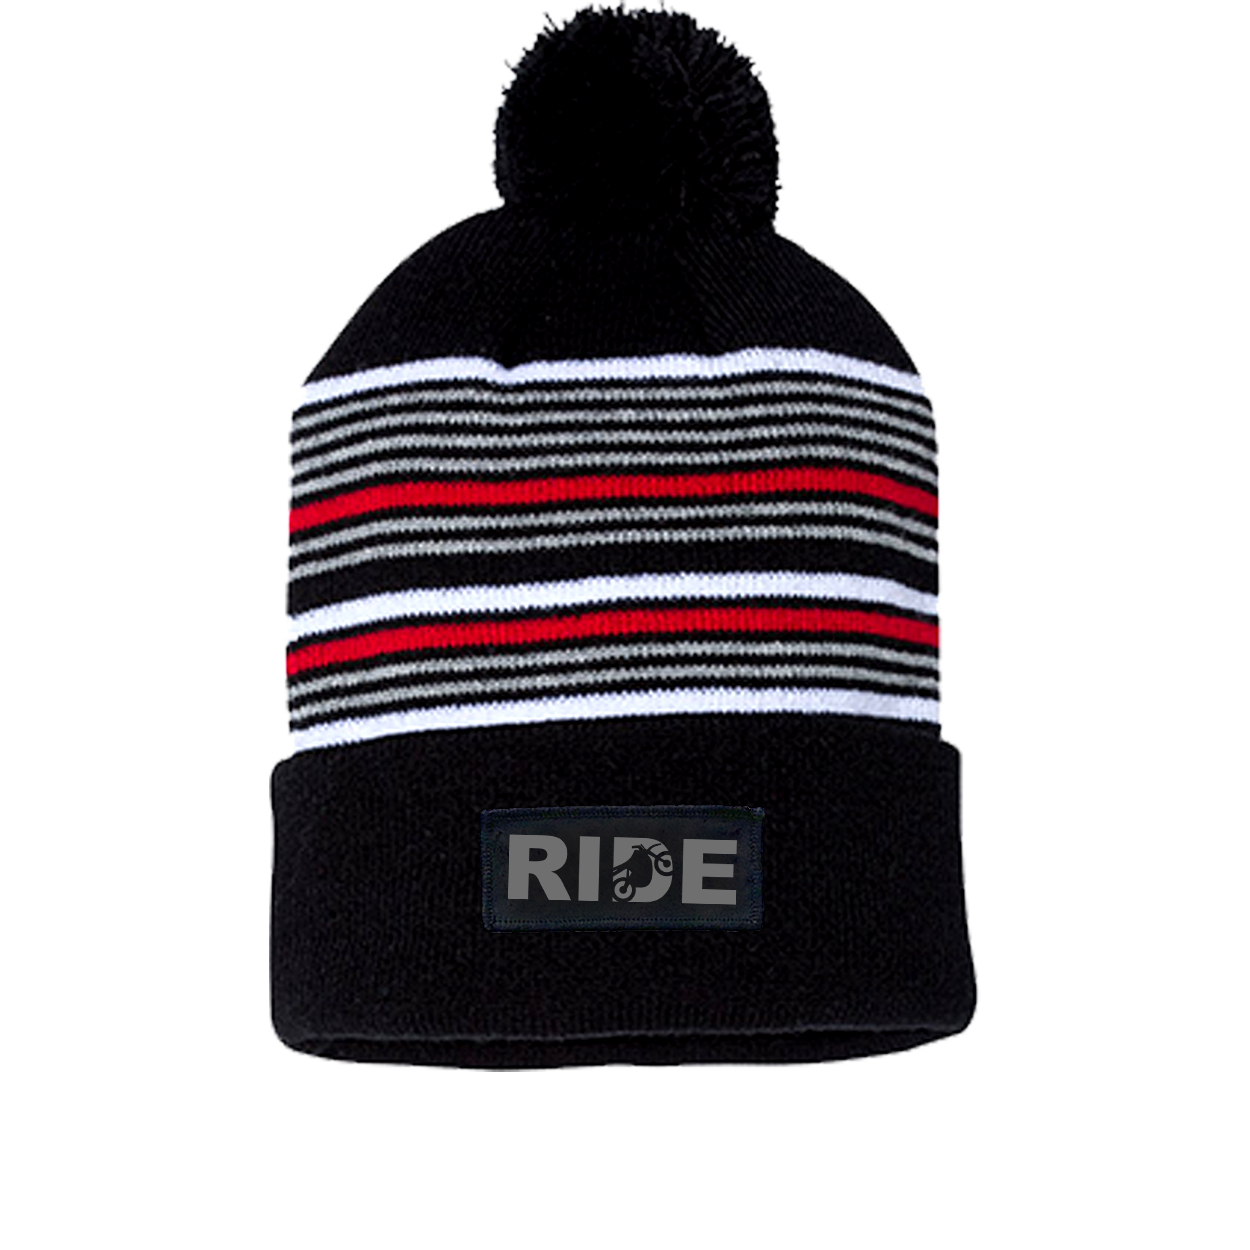 Ride Moto Logo Night Out Woven Patch Roll Up Pom Knit Beanie Black/ White/ Grey/ Red Beanie (Gray Logo)